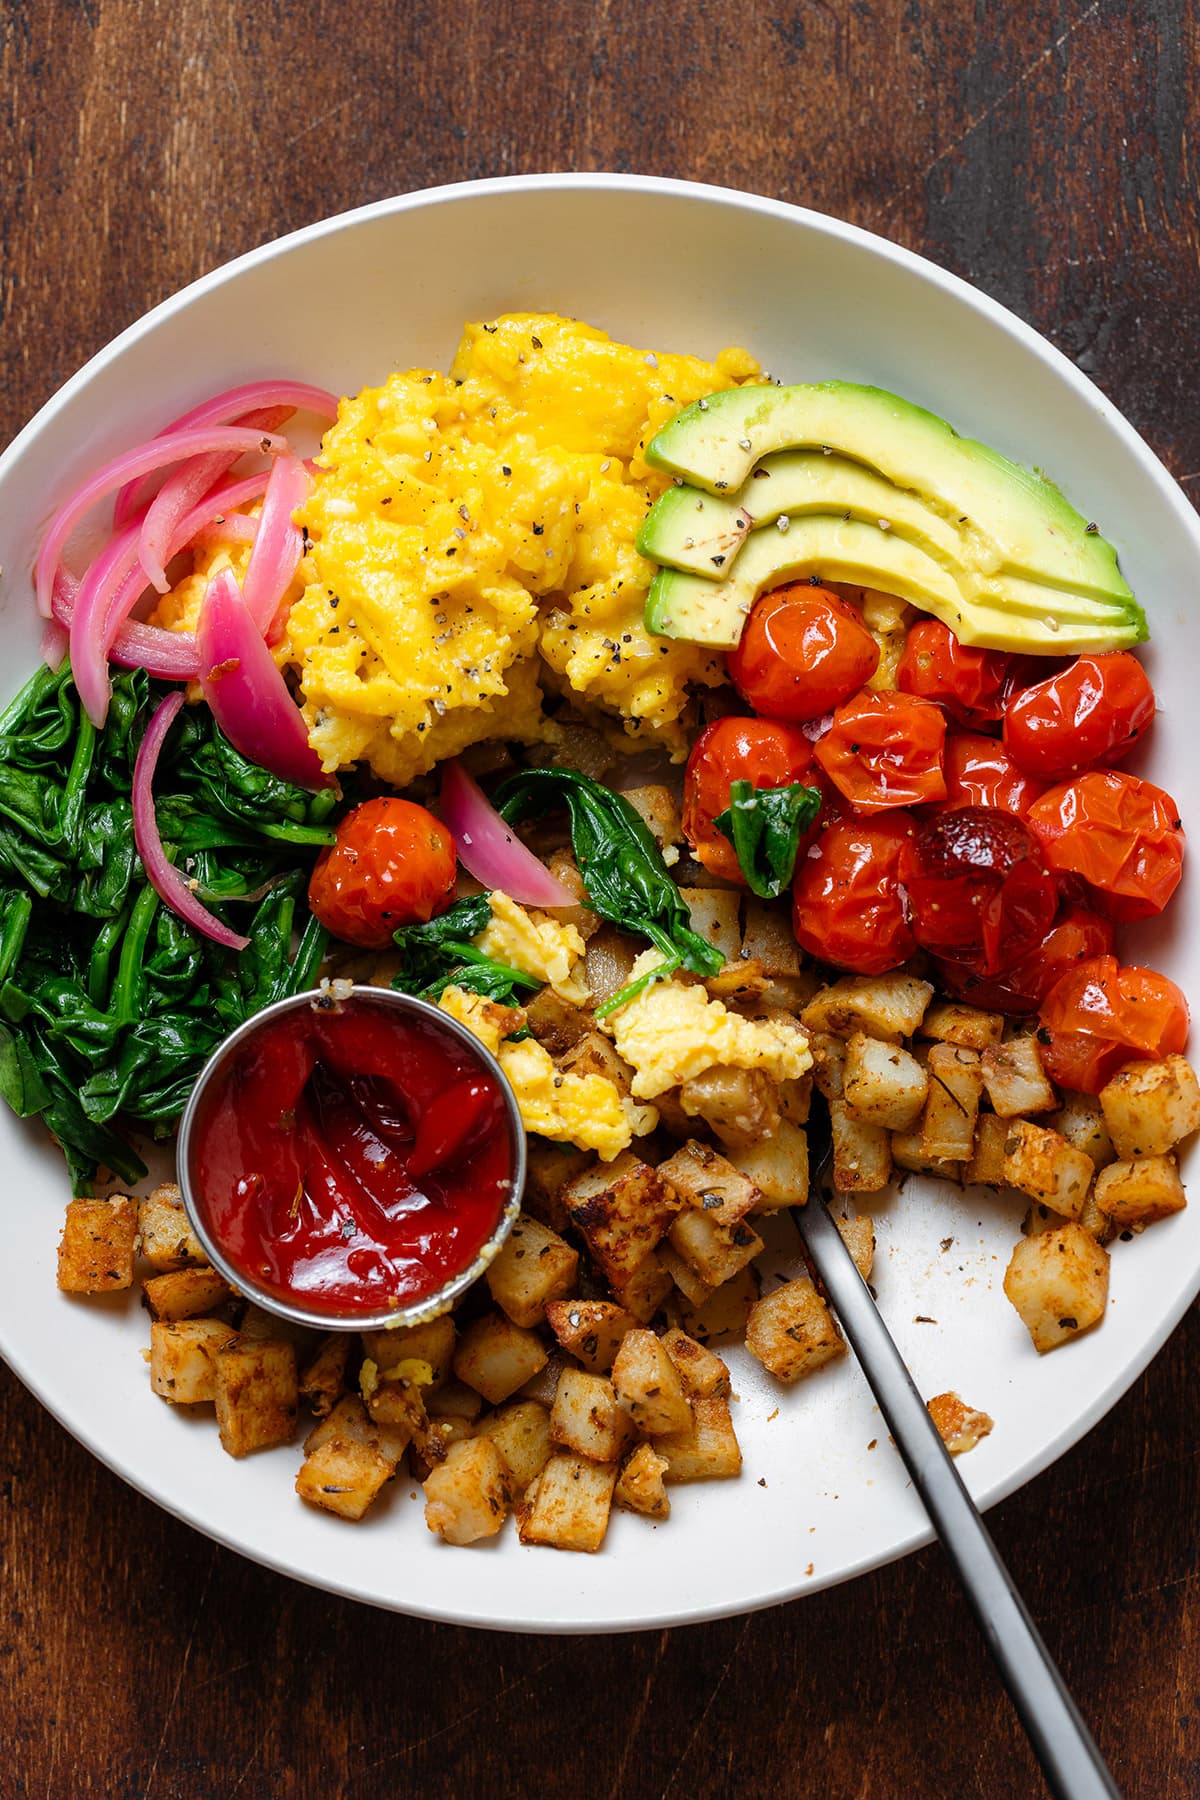 A bowl with scrambled eggs, roasted potatoes, roasted tomatoes, spinach, and ketchup, partially eaten.